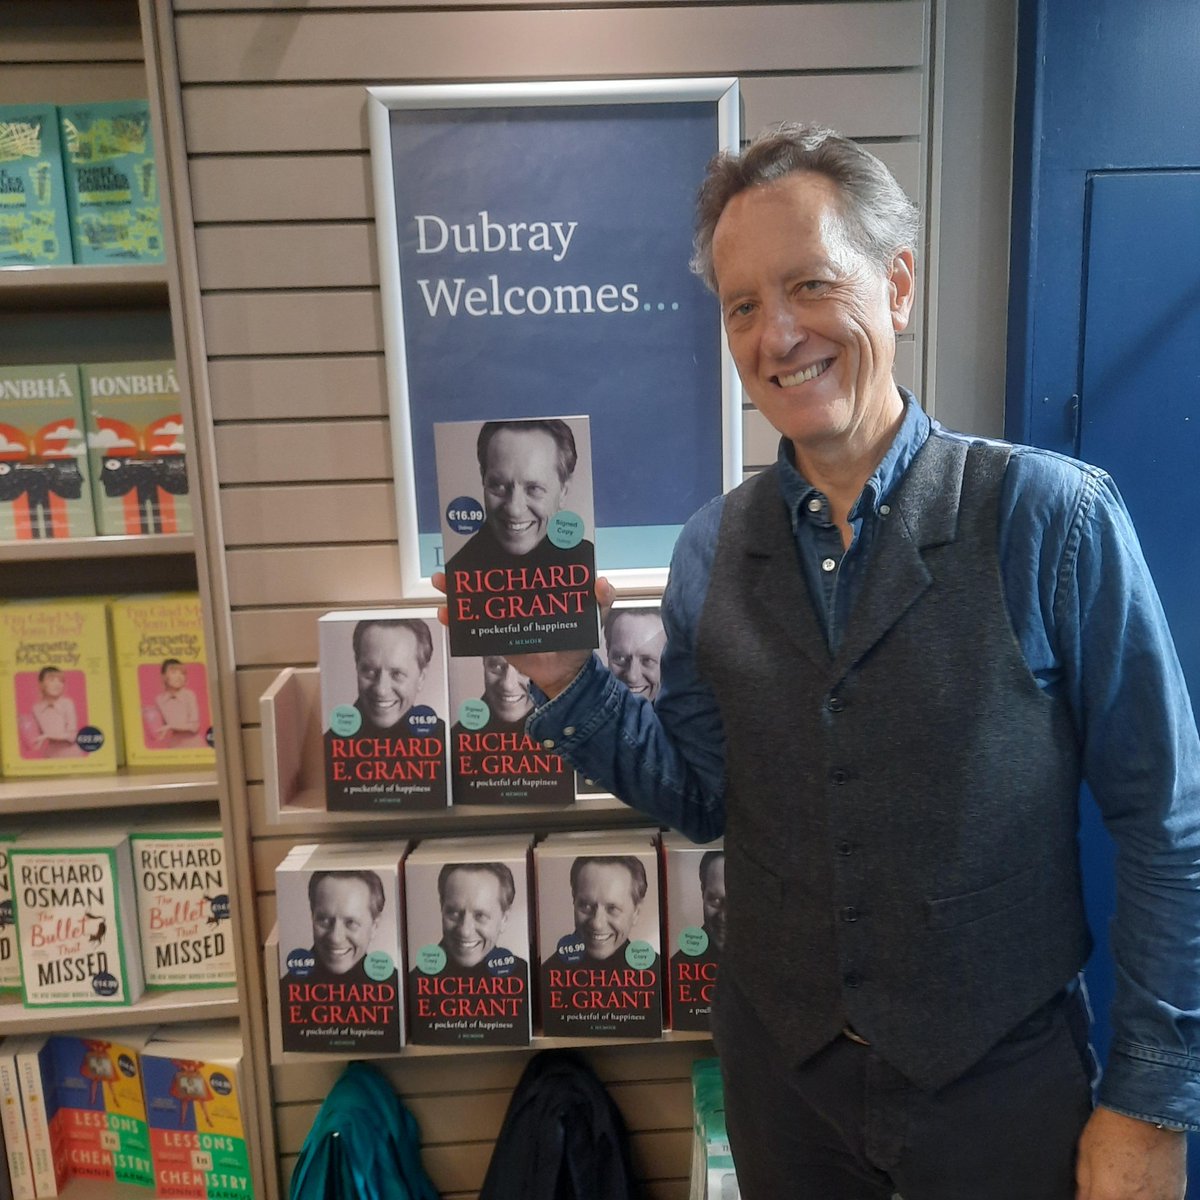 As seen on #thelatelateshow, @RichardEGrant discusses his memoir A Pocketful of Happiness. Filled with love, loss and the story of an extraordinary marriage... We've also got some signed copies in our Grafton Street shop ✨@simonschusterUK ow.ly/jtco50LhpWC